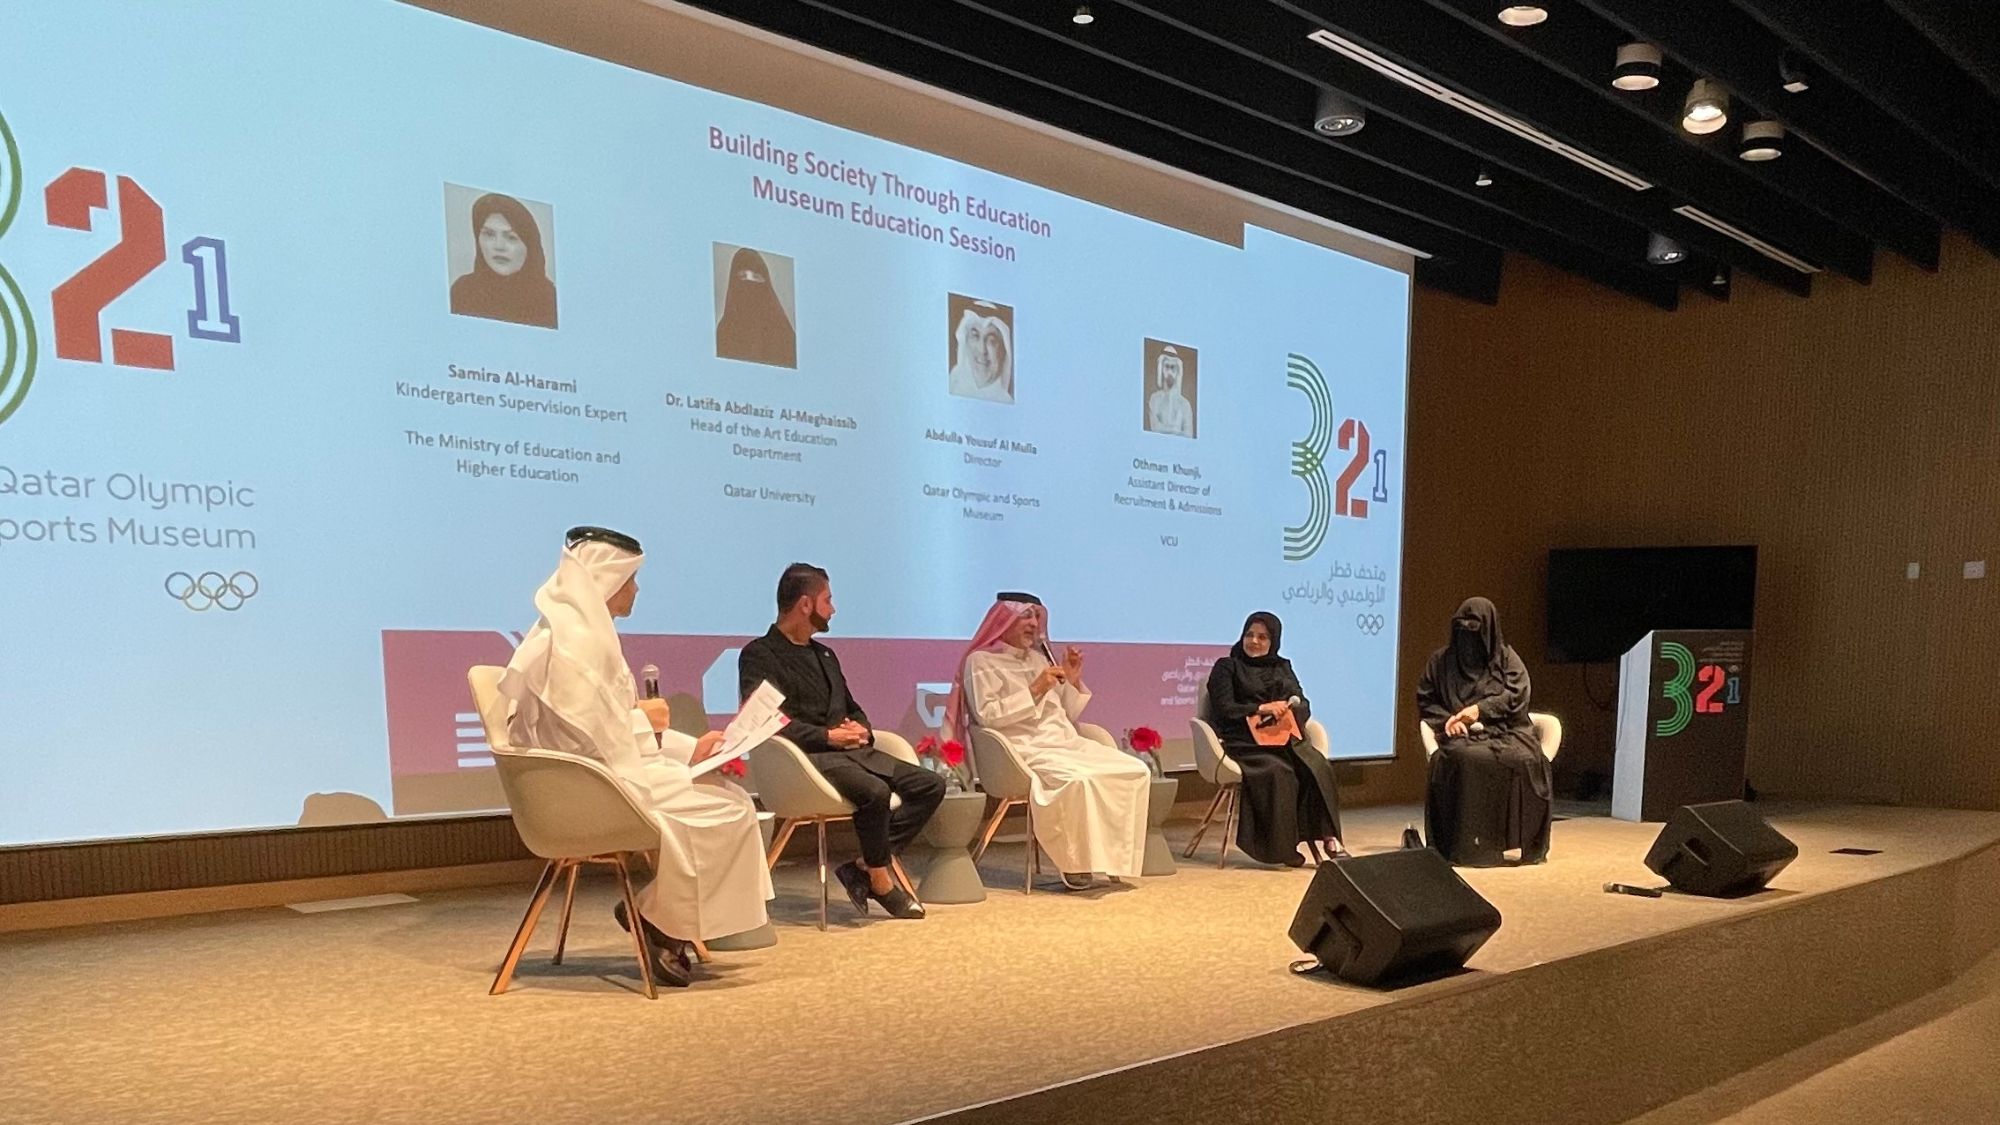 Alumni, Othman Khunji, participating in a panel discussion with other other individuals at the 3-2-1 Olympic and Sports Museum in Doha, Qatar.